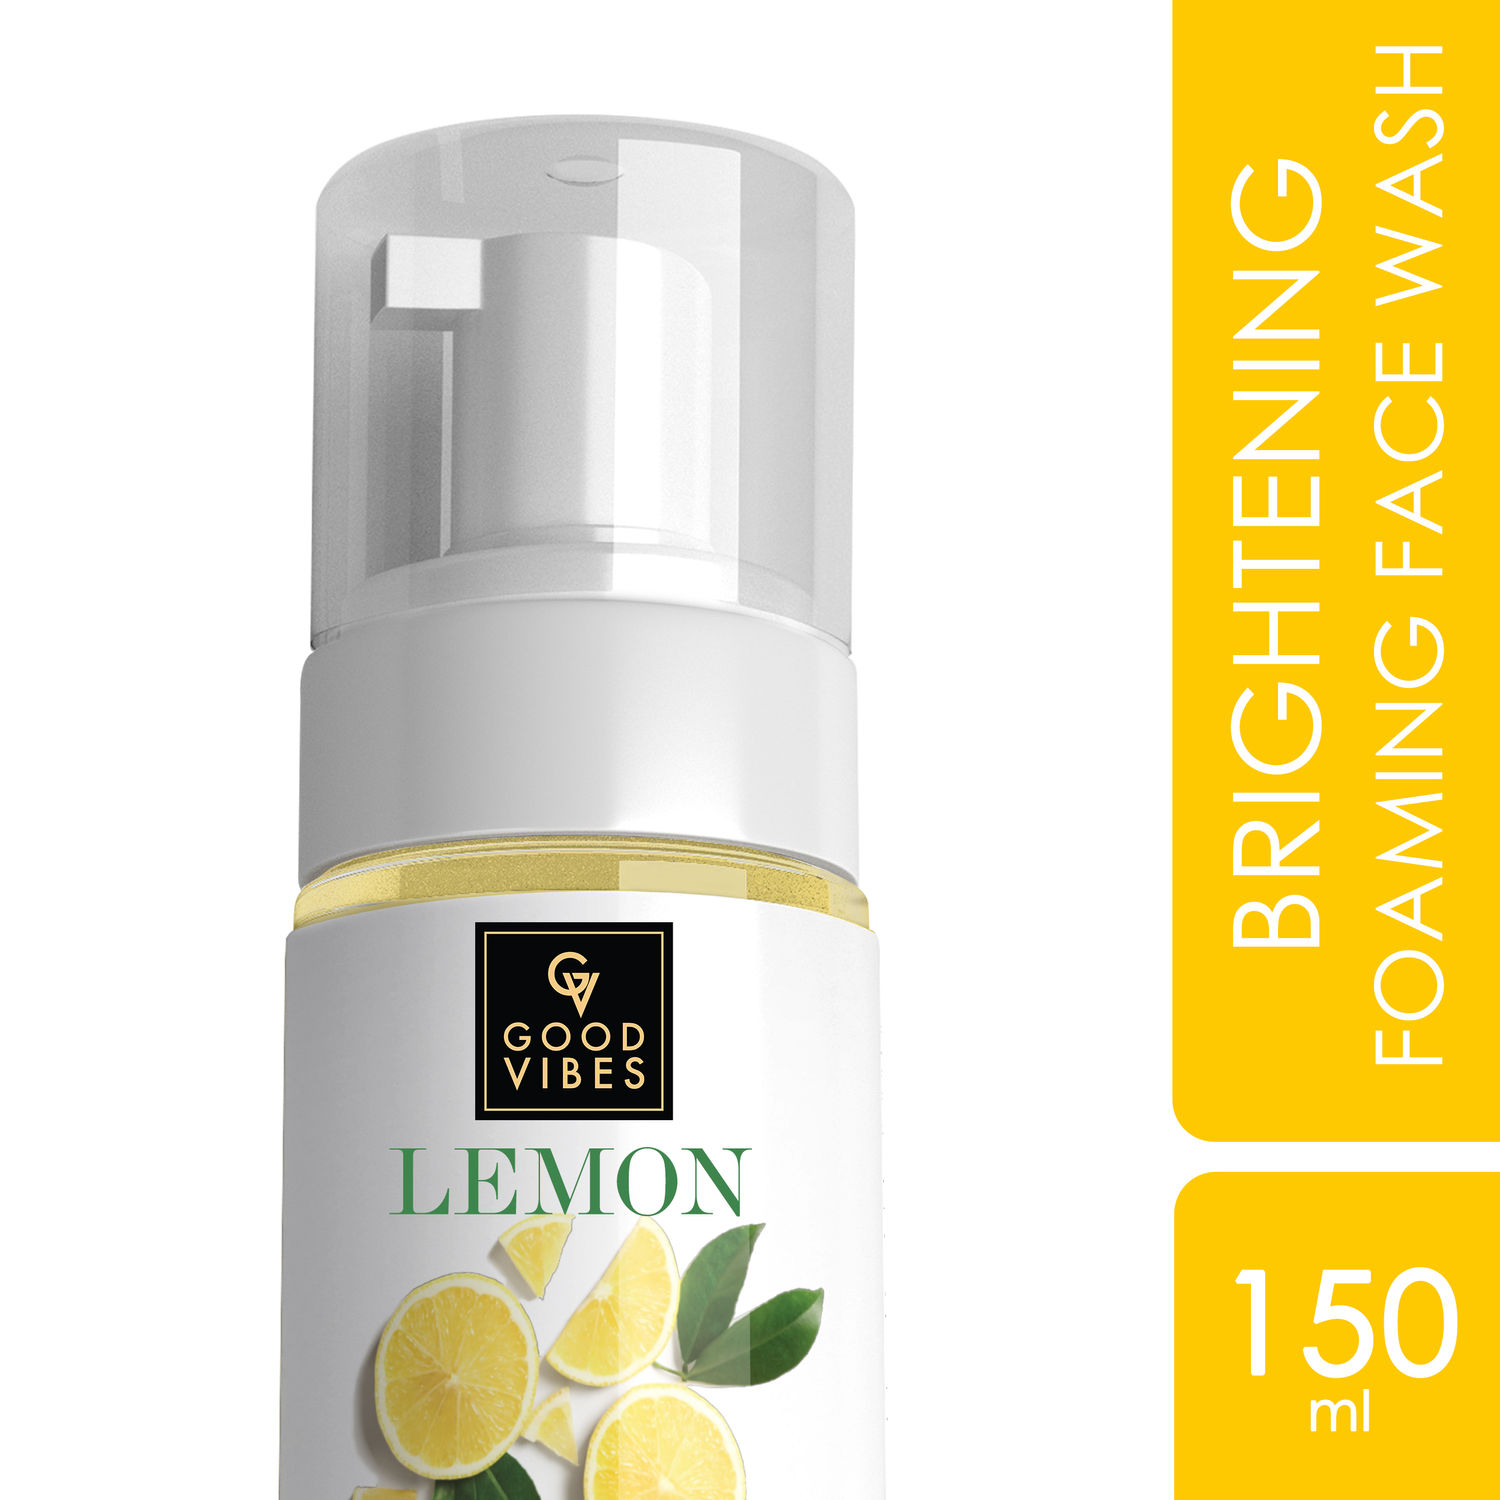 Buy Good Vibes Lemon Brightening Foaming Face Wash | Hydrating, Sebum Control | No Parabens, No Sulphates, No Mineral Oil, No Animal Testing (150ml) - Purplle